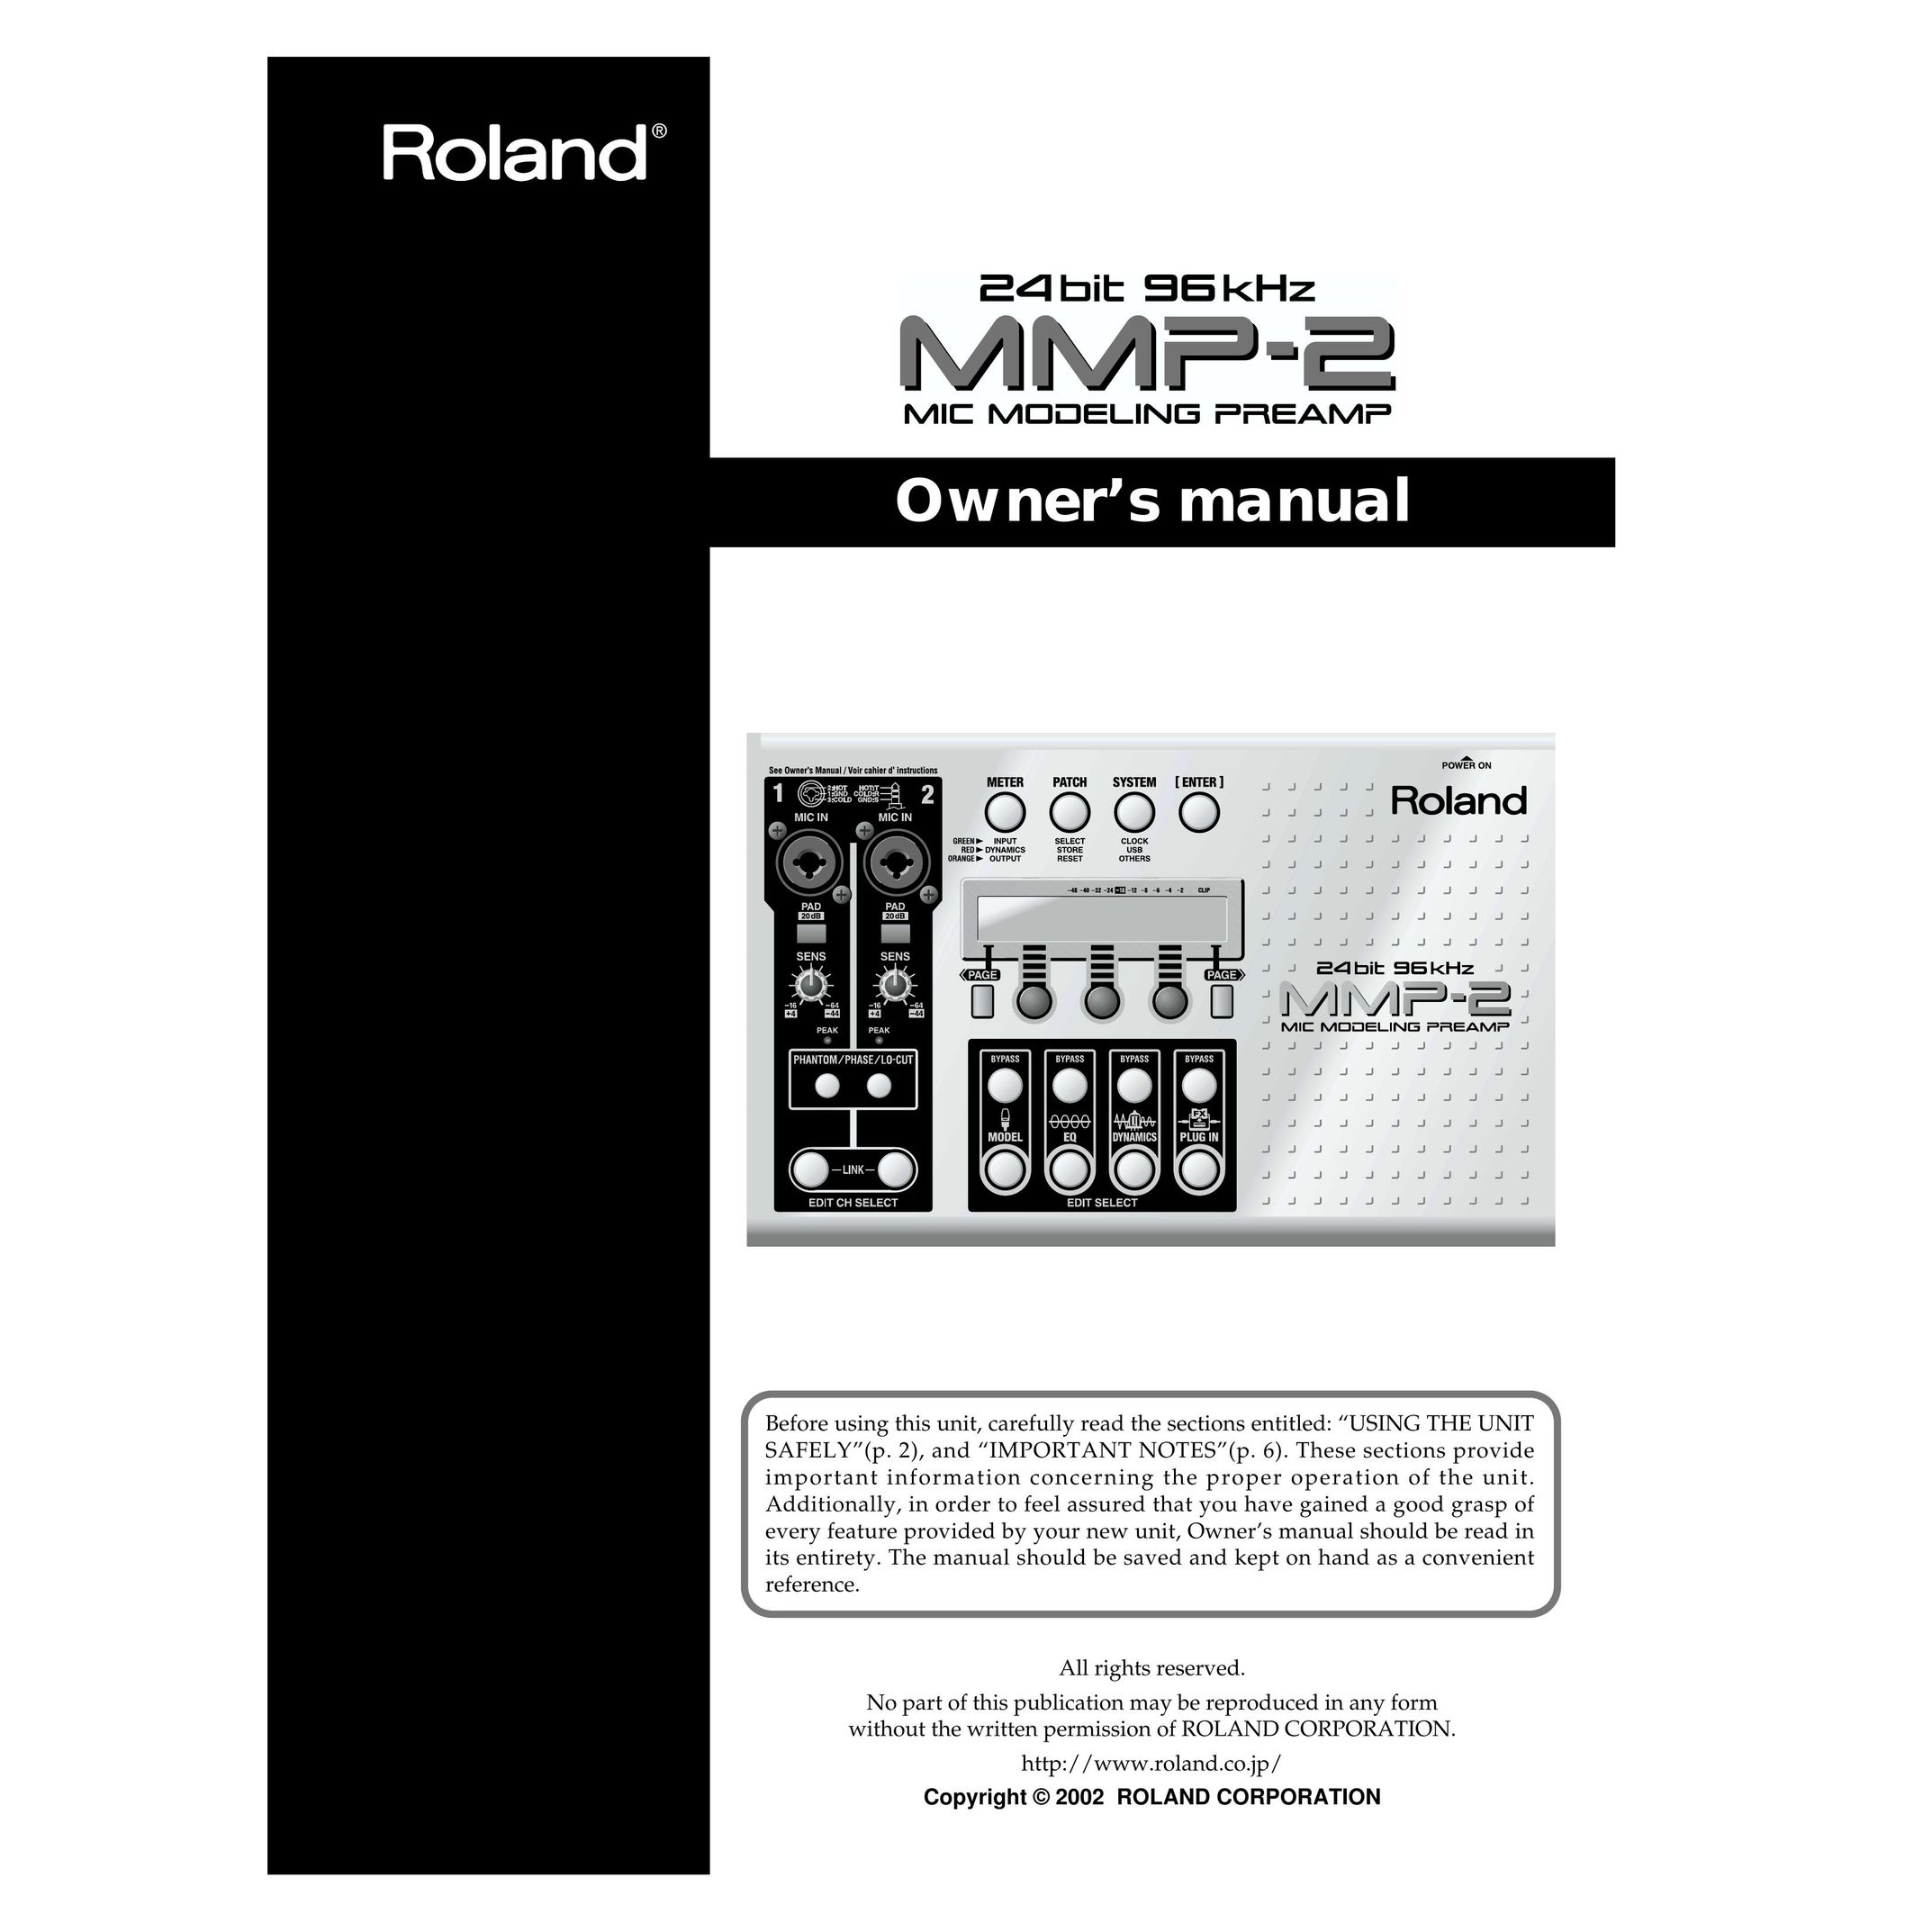 Roland MMP-2 Stereo Amplifier User Manual